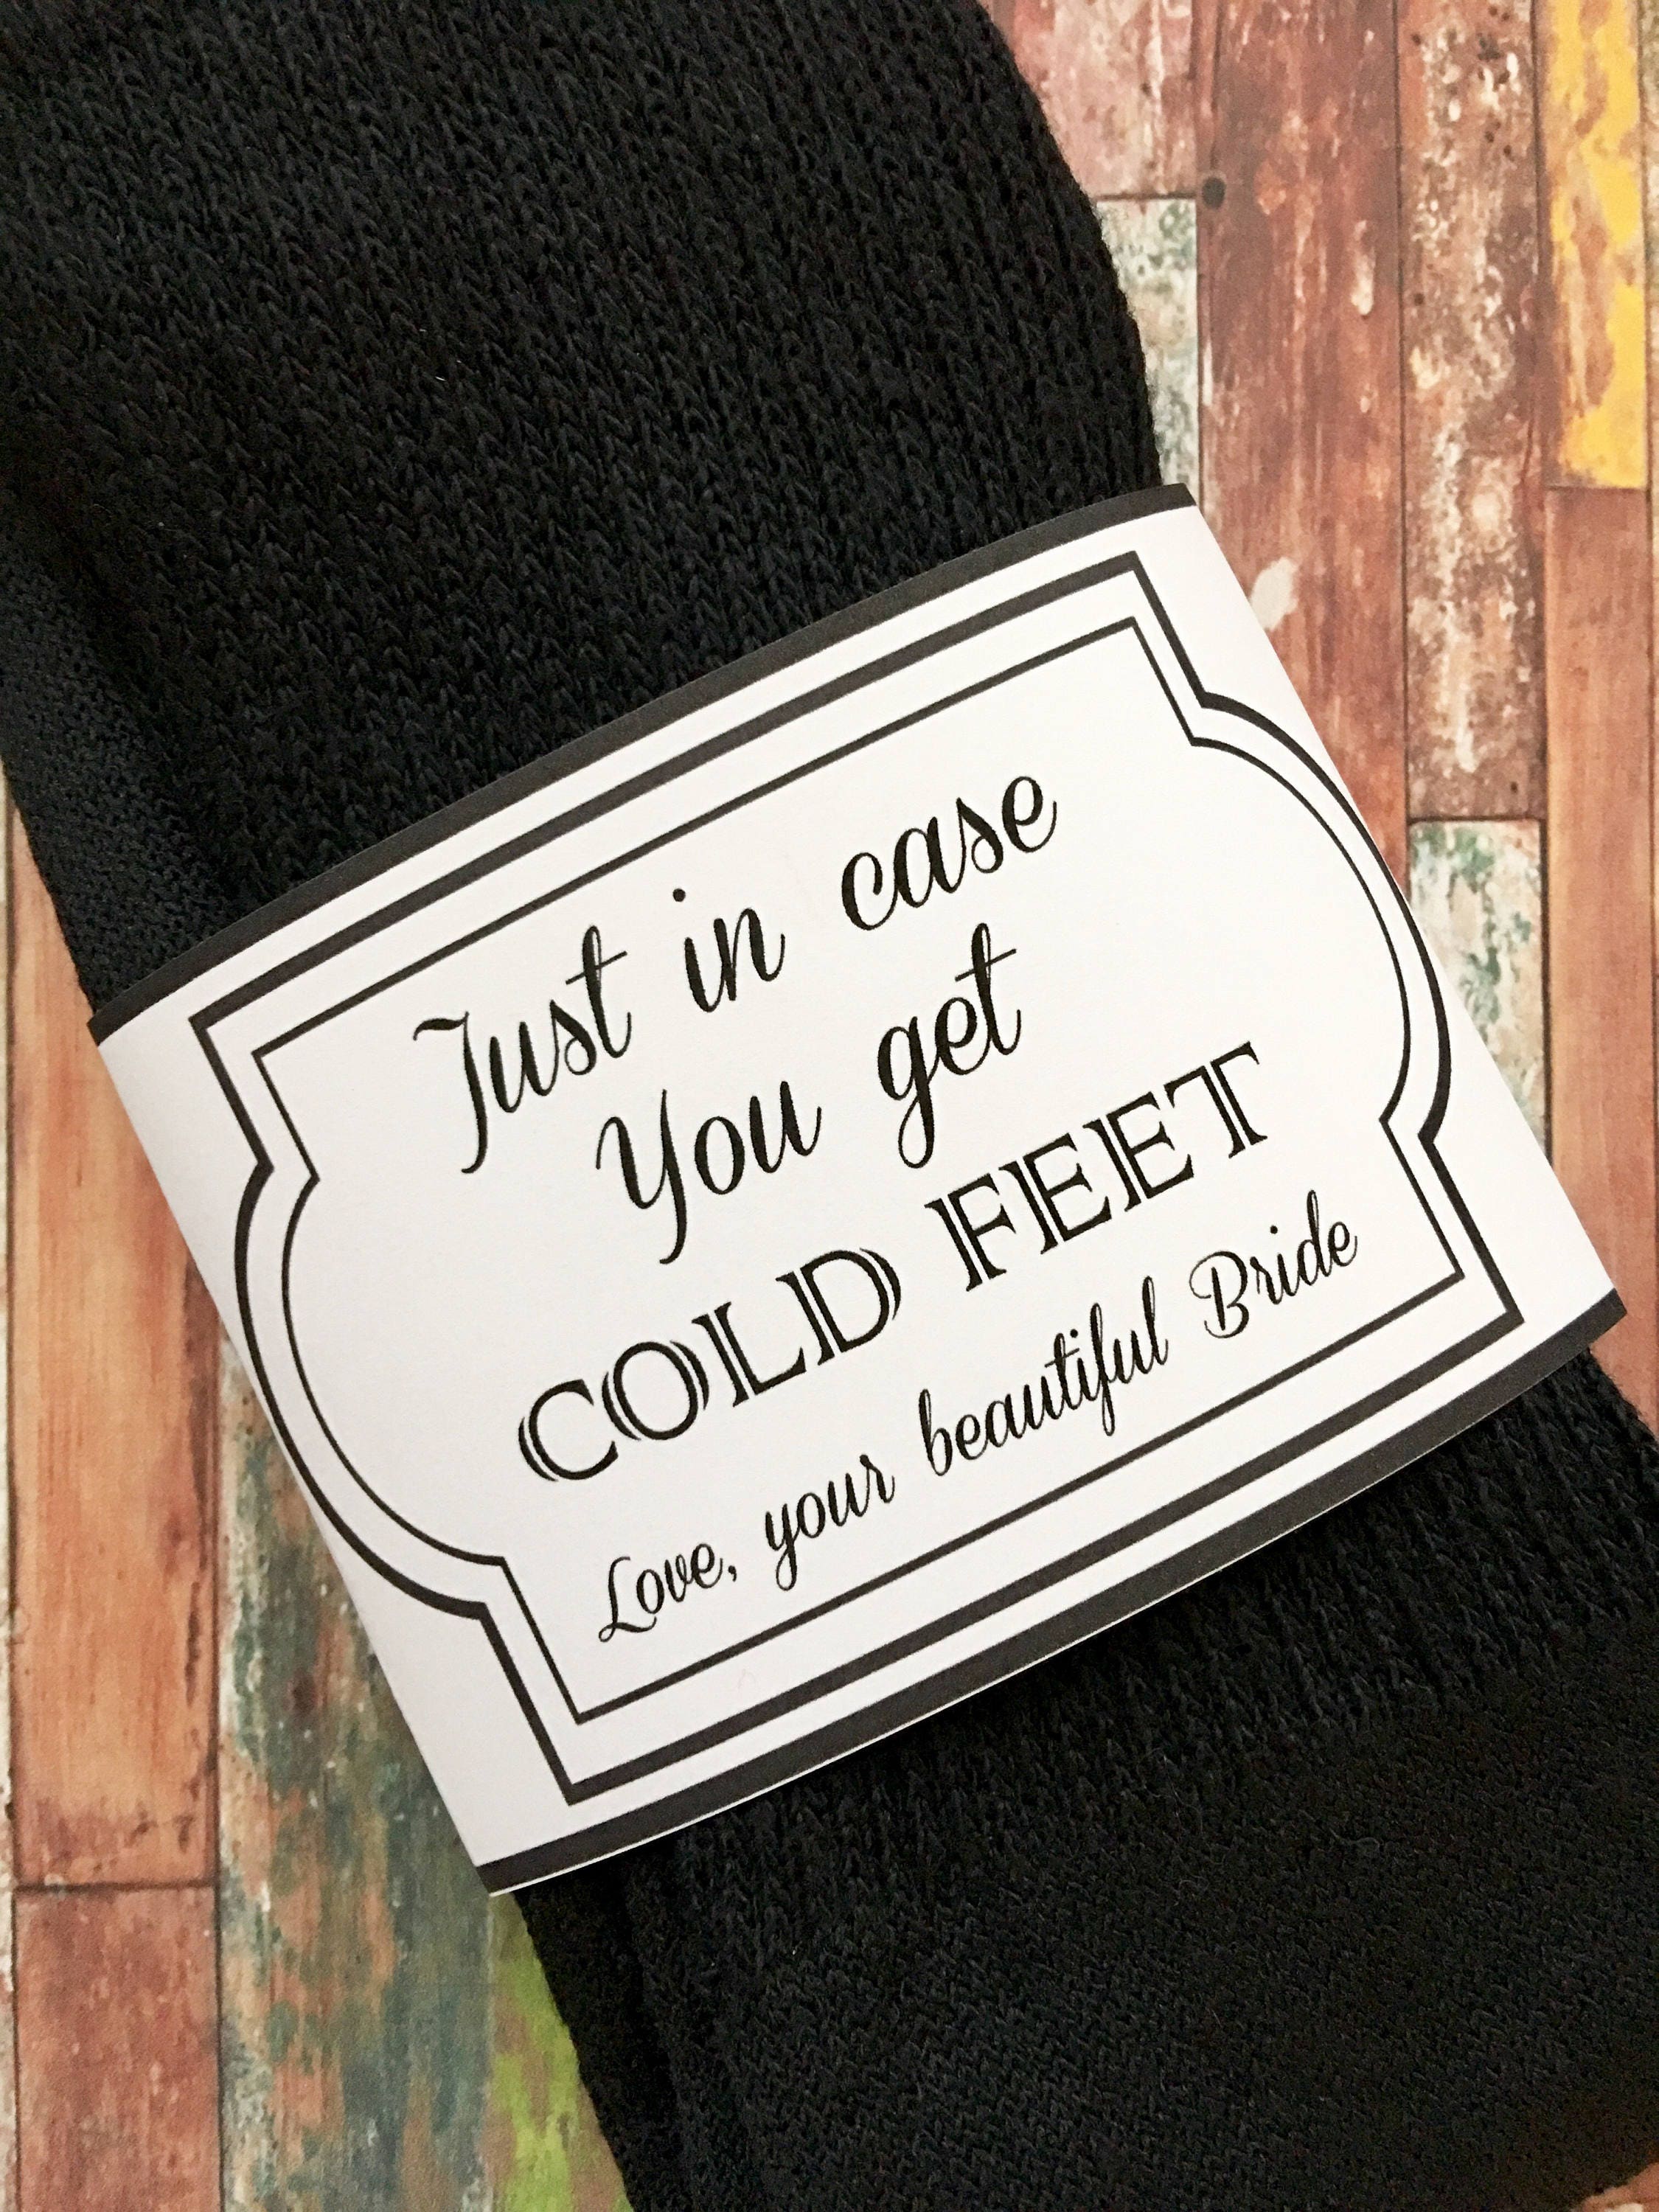 Just in Case You Get Cold Feet Socks for the Wedding Day - Groom Gift ...